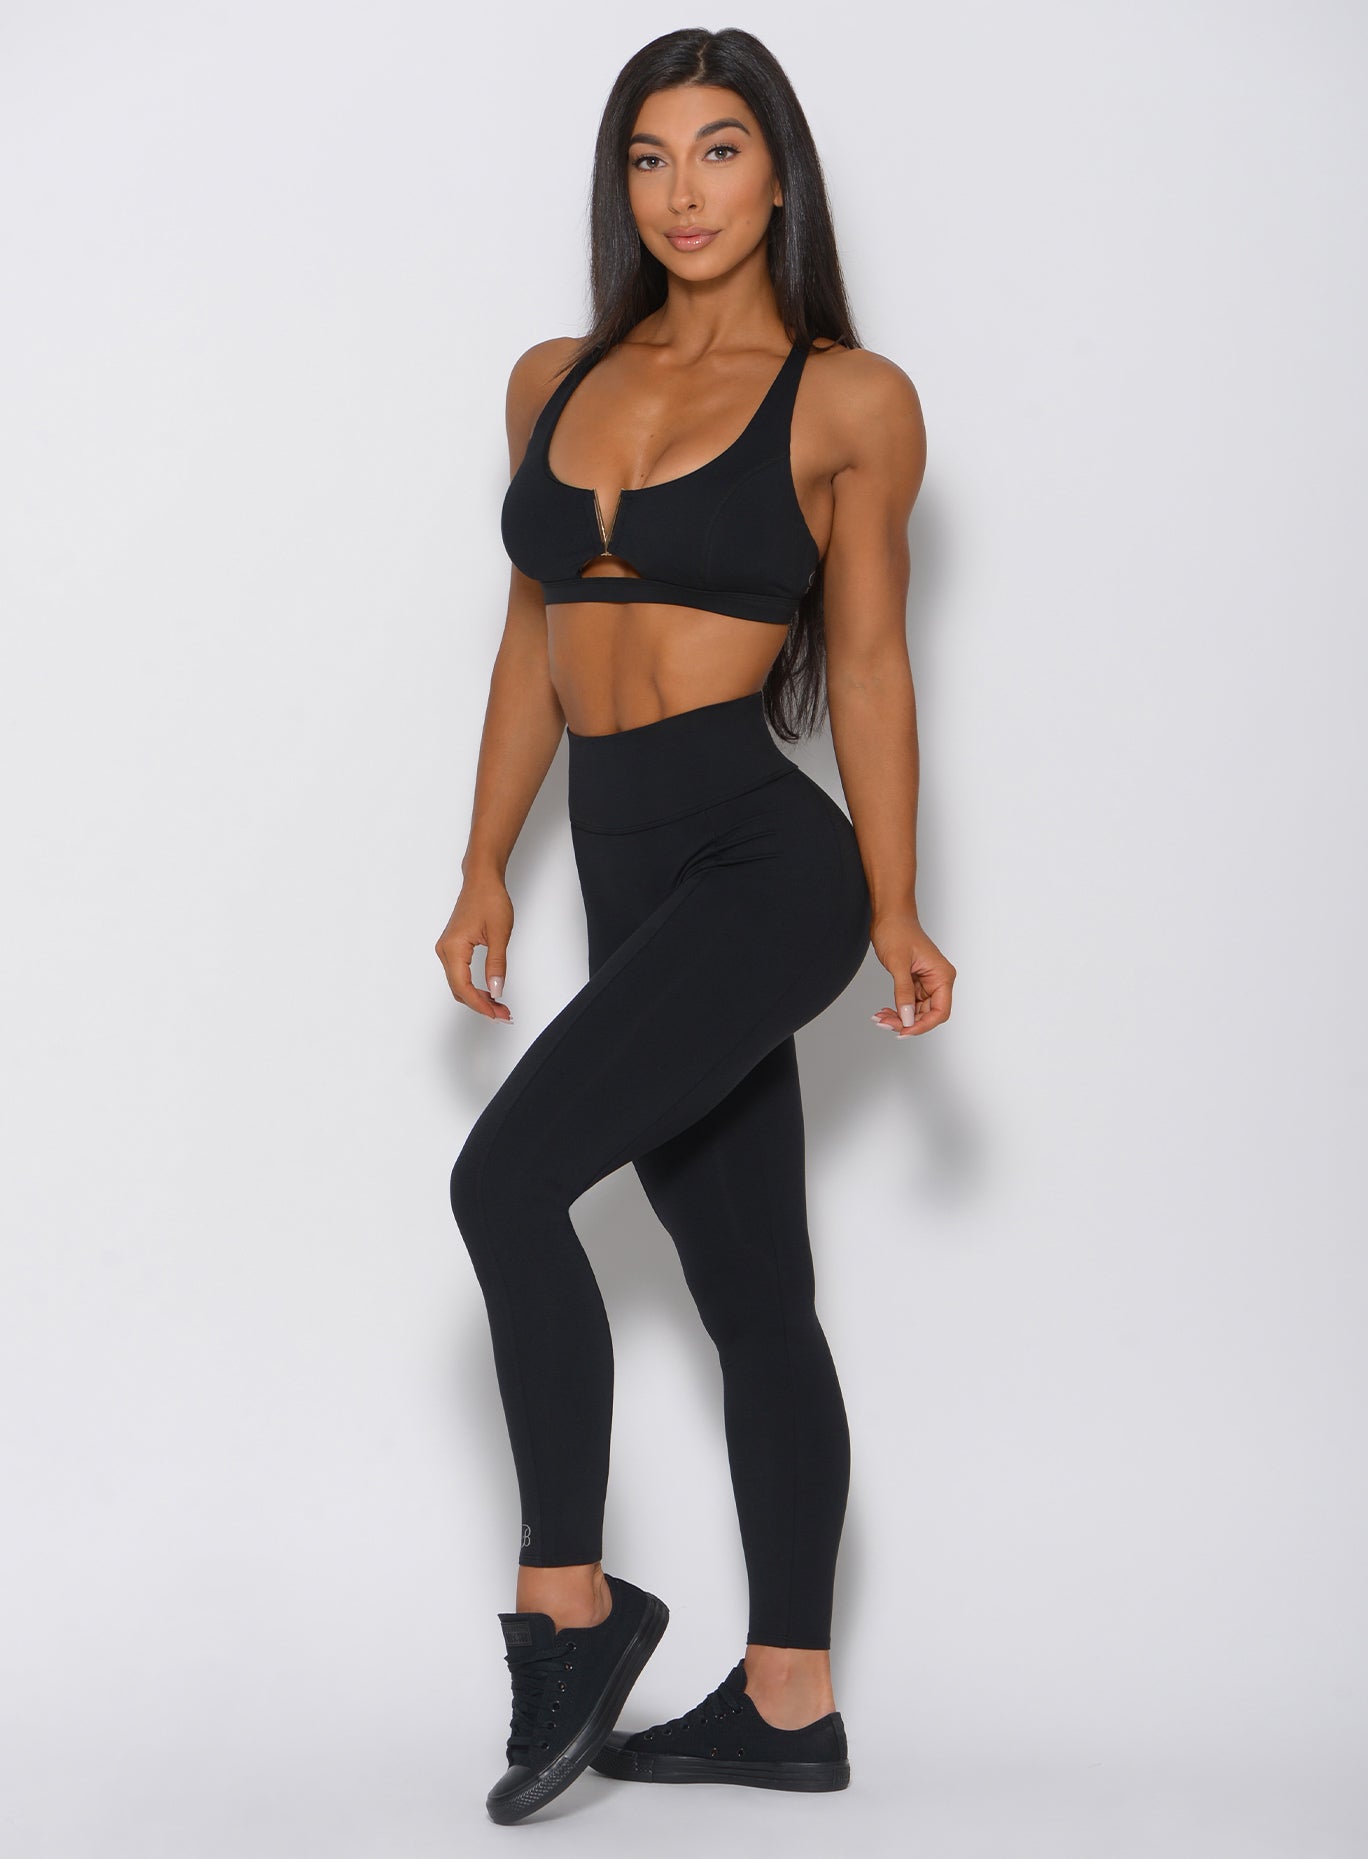 Left side profile view of a model angled left wearing our victory leggings in black and a matching sports bra 